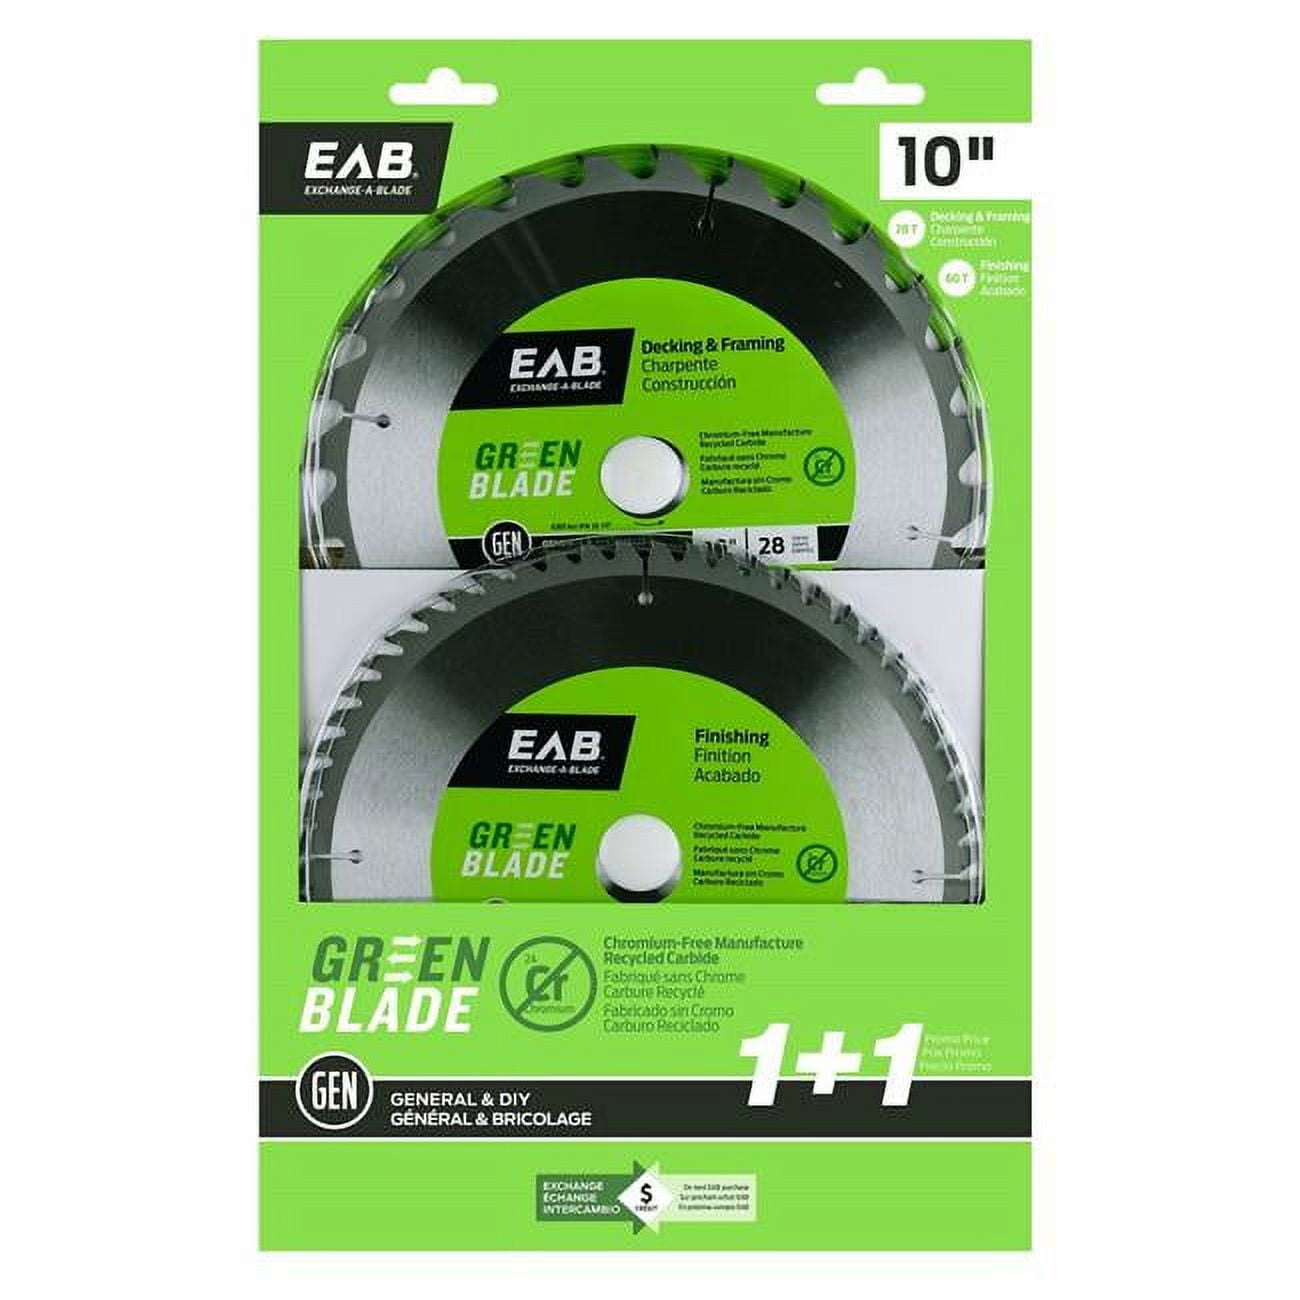 Exchange-a-Blade 2500011 10 in. x 28 & 60 Teeth Framing Combo Saw Blade - Recyclable Exchangeable - 2 Piece